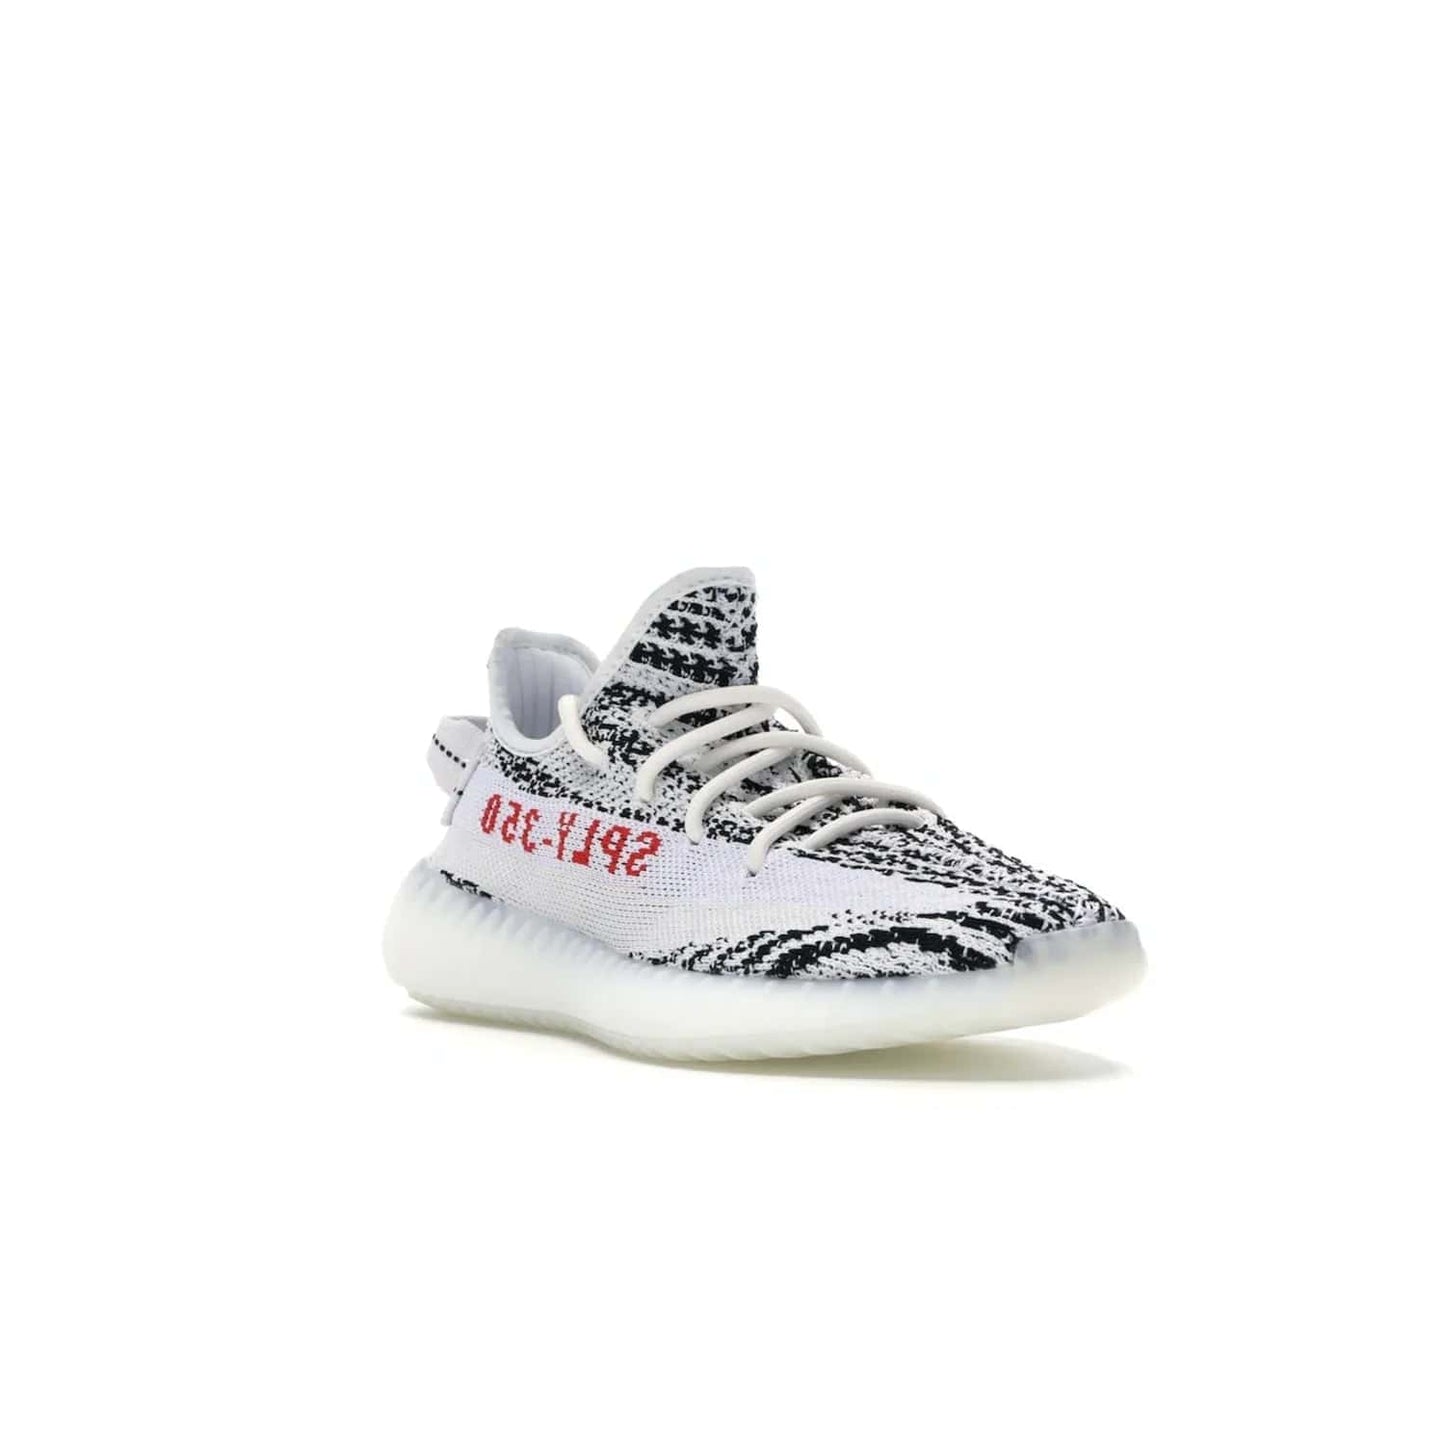 adidas Yeezy Boost 350 V2 Zebra - Image 6 - Only at www.BallersClubKickz.com - #
Score the iconic adidas Yeezy Boost 350 V2 Zebra for a fashionable addition to your street-style. Featuring a Primeknit upper and Boost sole, you'll look great and feel comfortable with every step.